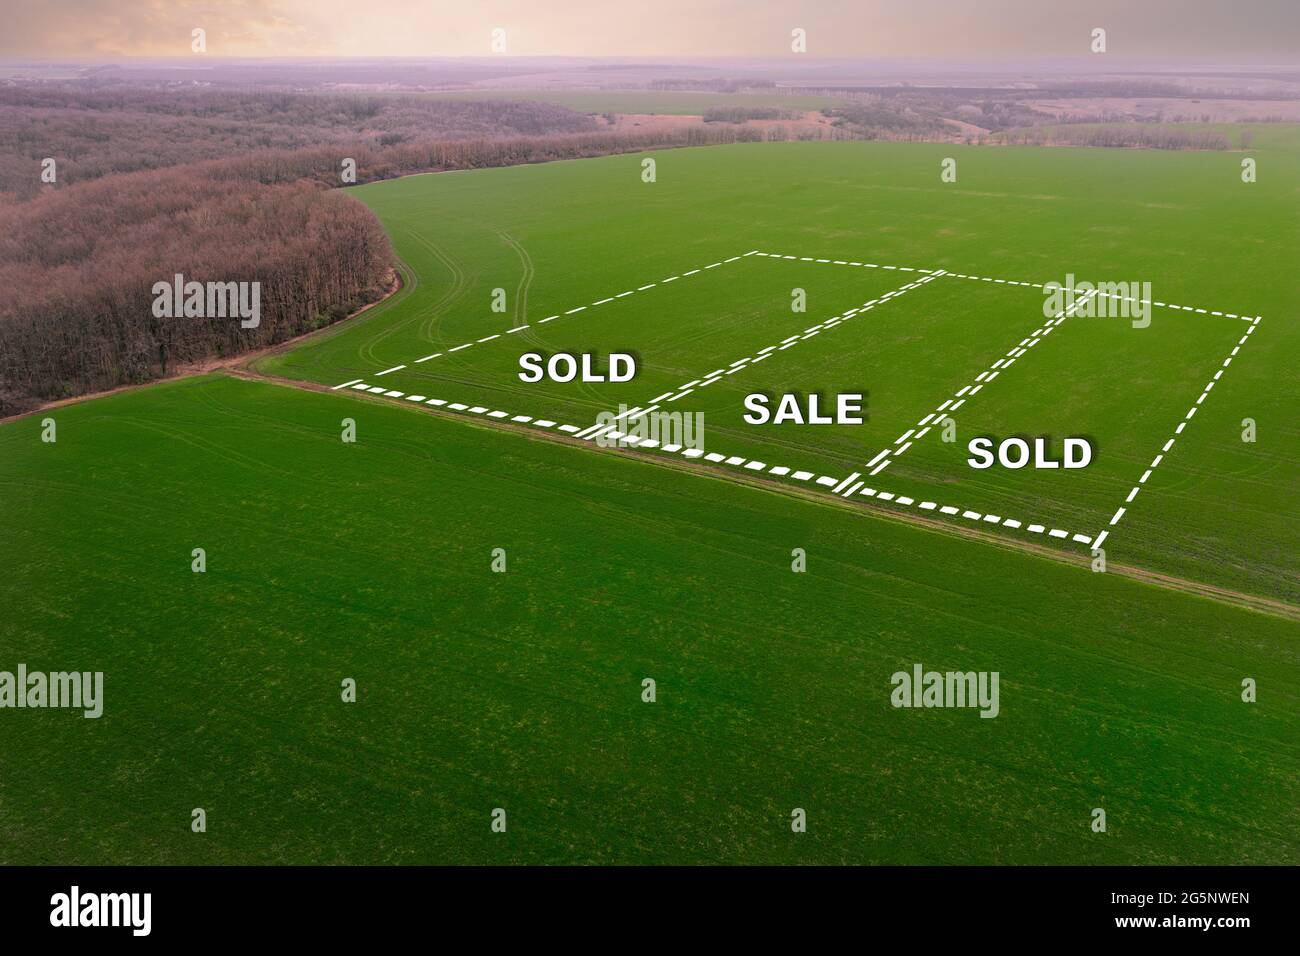 The concept of the land market for the sale of agricultural land. Farmlands for growing crops - aerial shot with the inscription Sold and Sale. Stock Photo